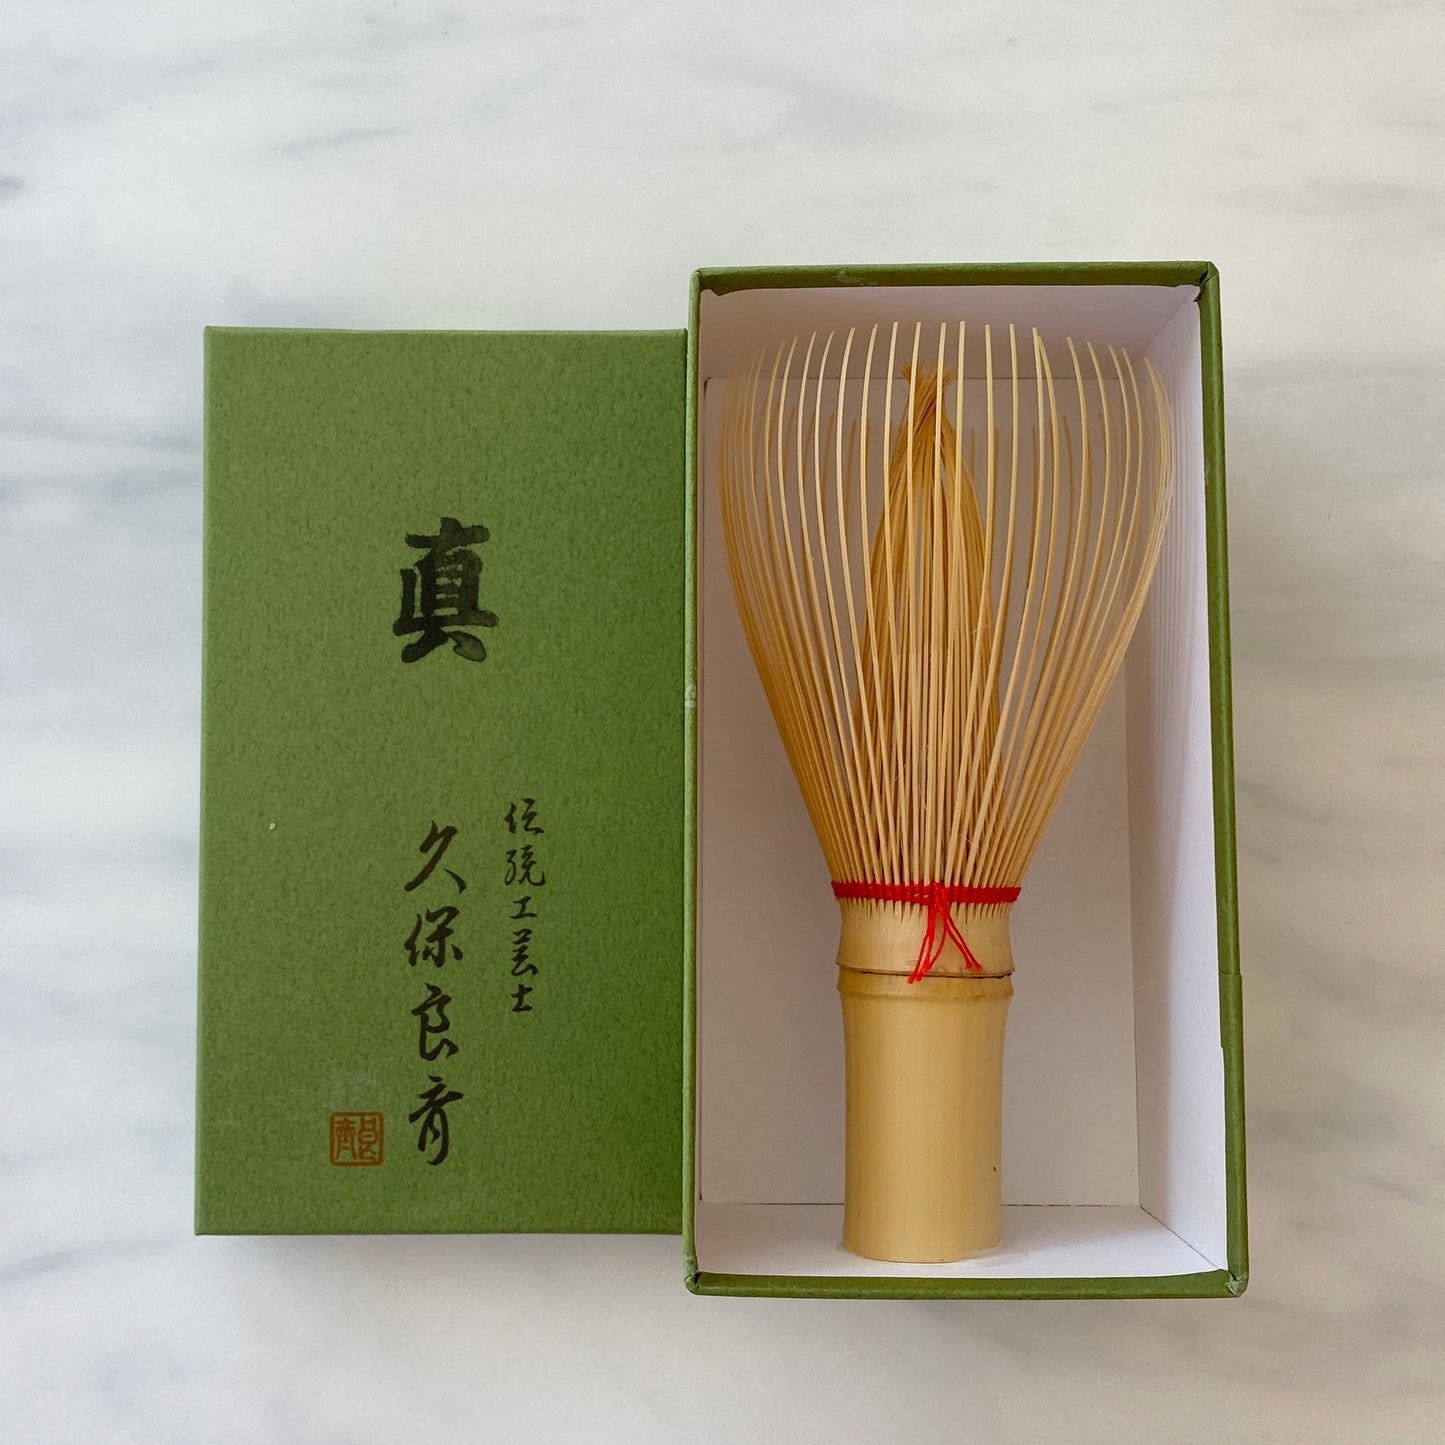 White Whisk with Color String Shirotake Takayama Chasen l 真 白竹 高山茶筅 色糸